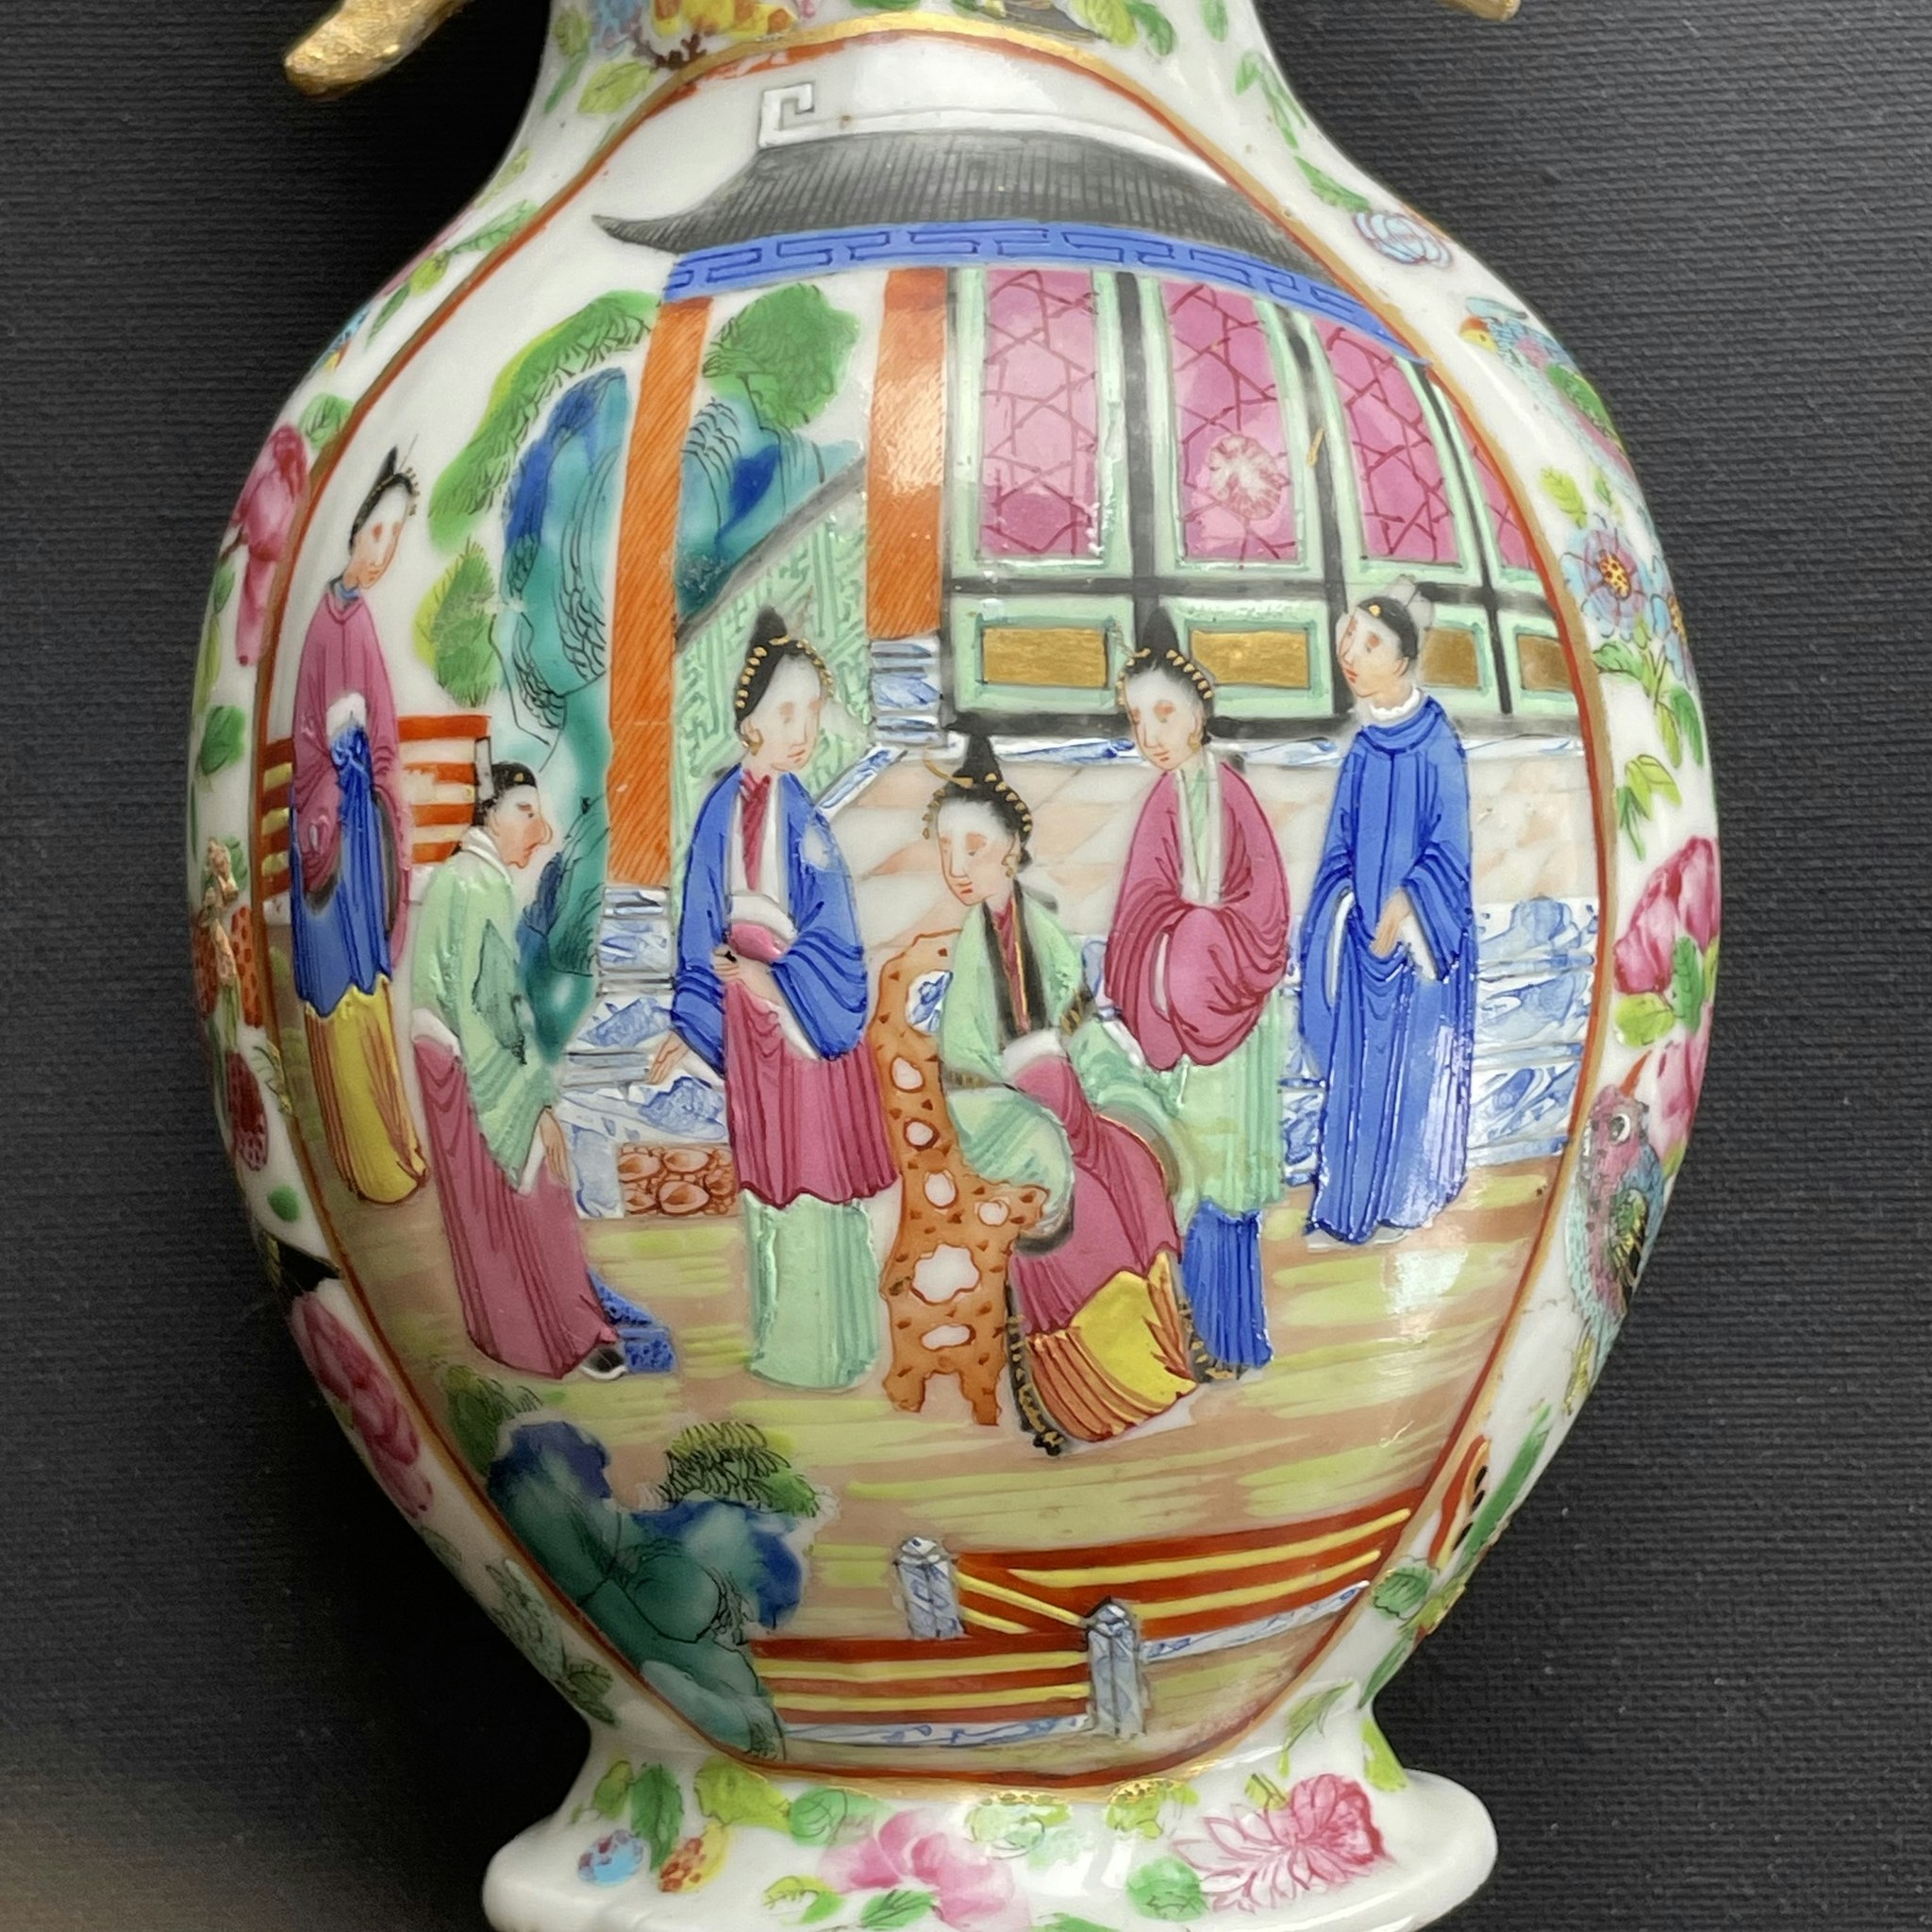 Chinese antique rose mandarin vase, first half of the 19th c, Daoguang #1812